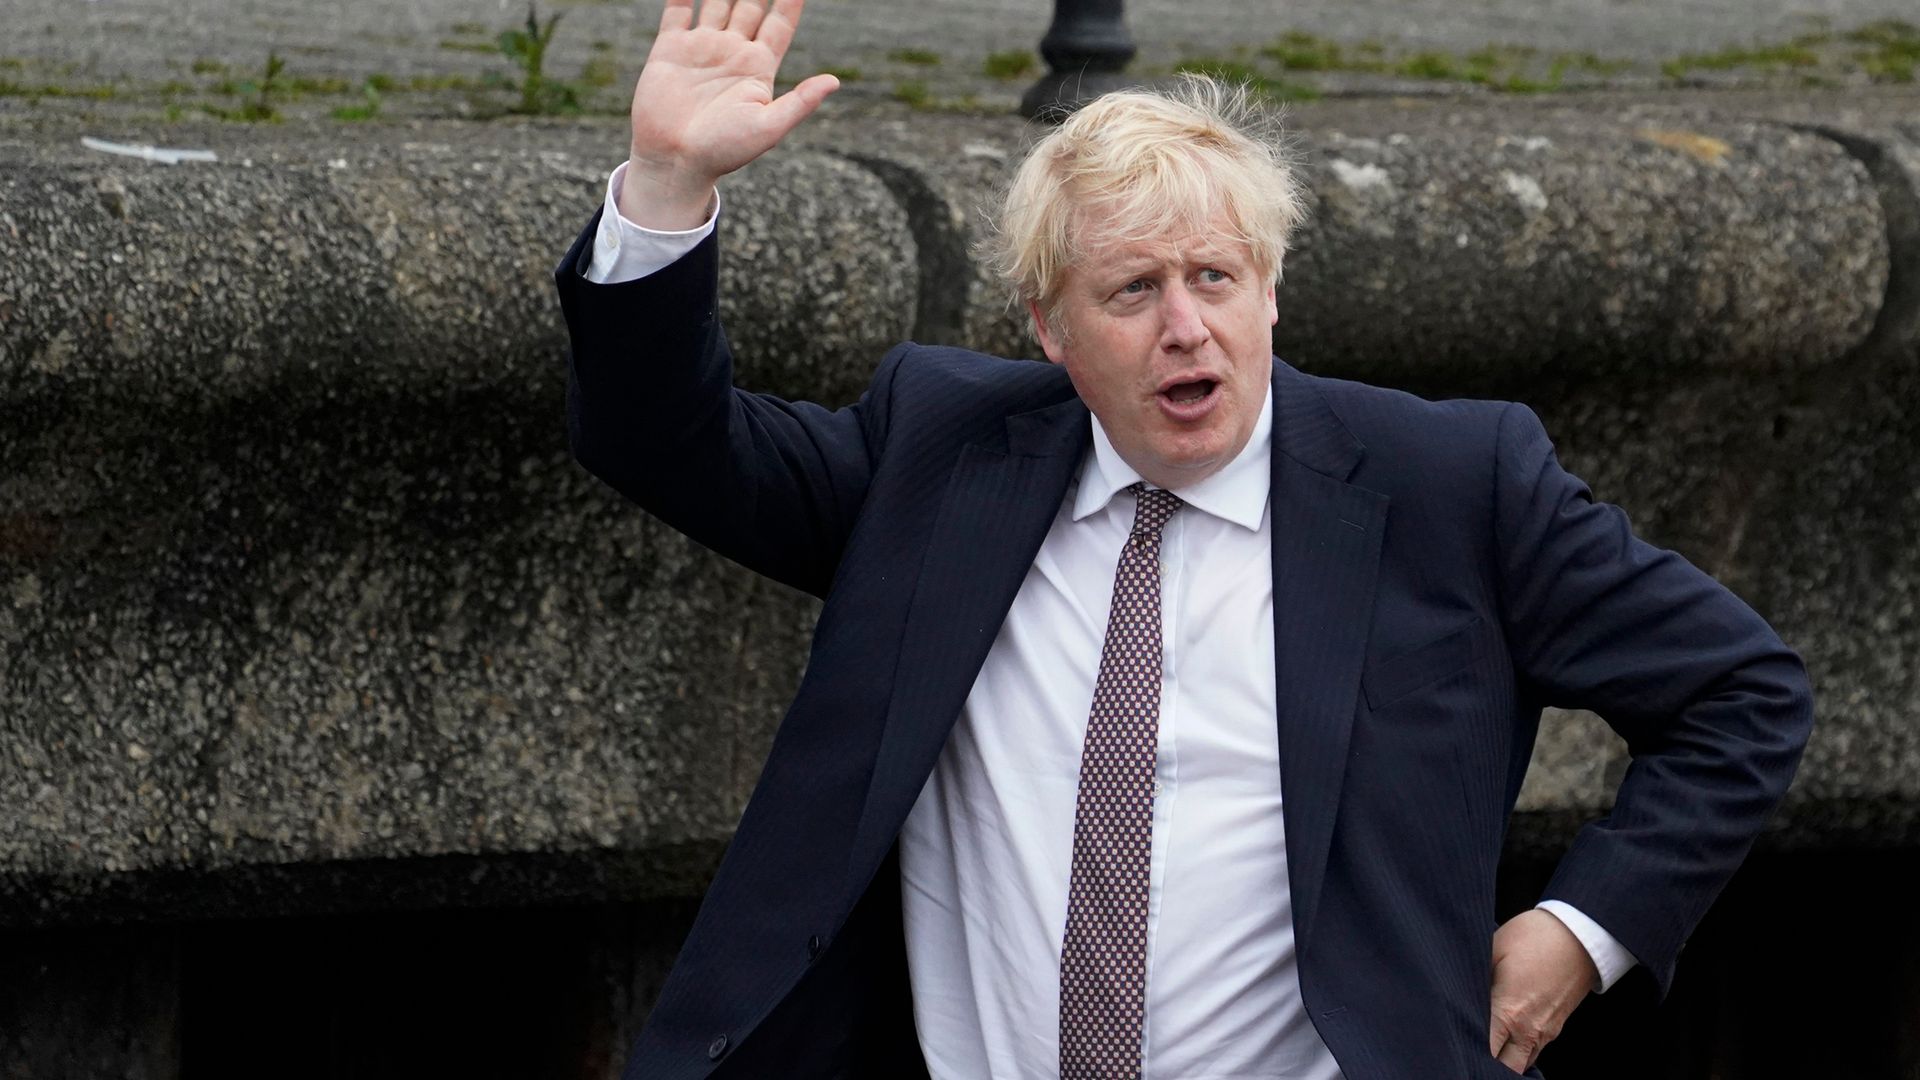 Boris Johnson waves to onlookers during a visit to Falmouth ahead of the G7 summit - Credit: Getty Images